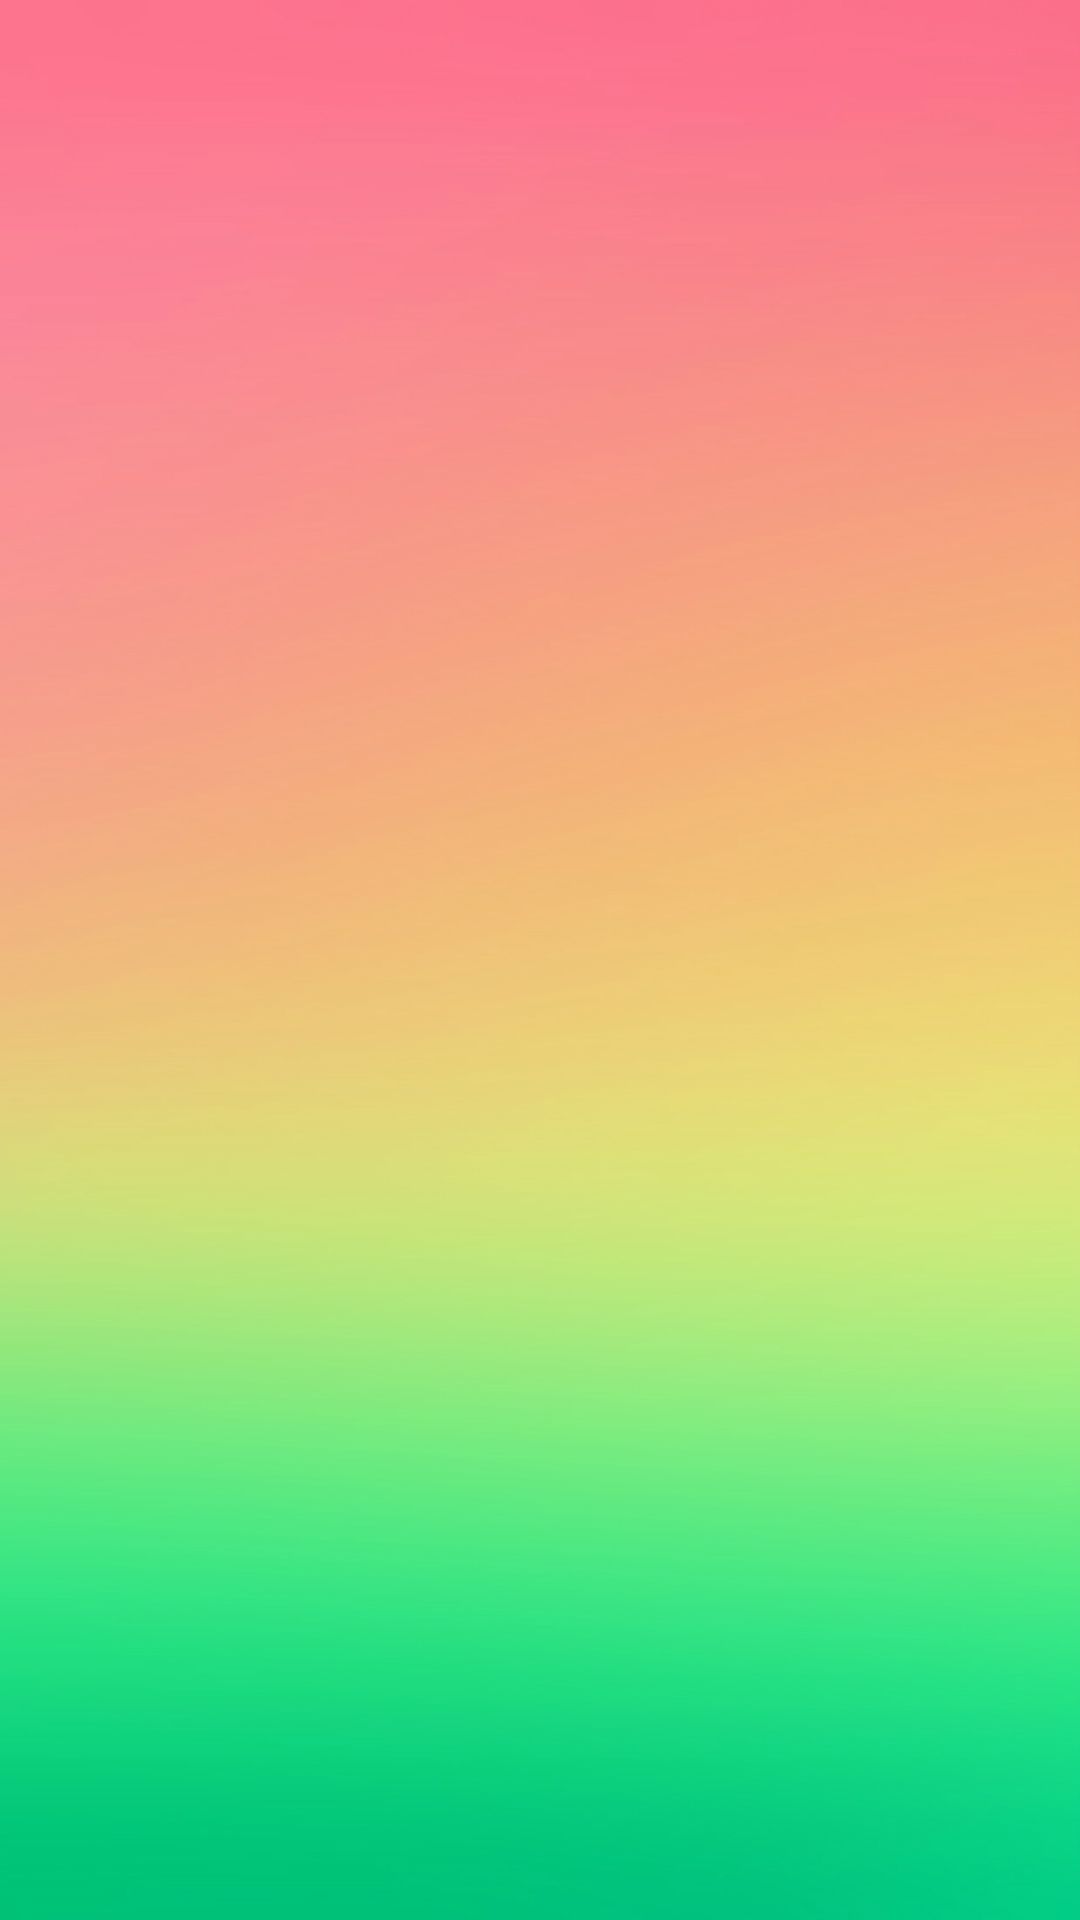 Green Pink And Yellow - 1080x1920 Wallpaper 